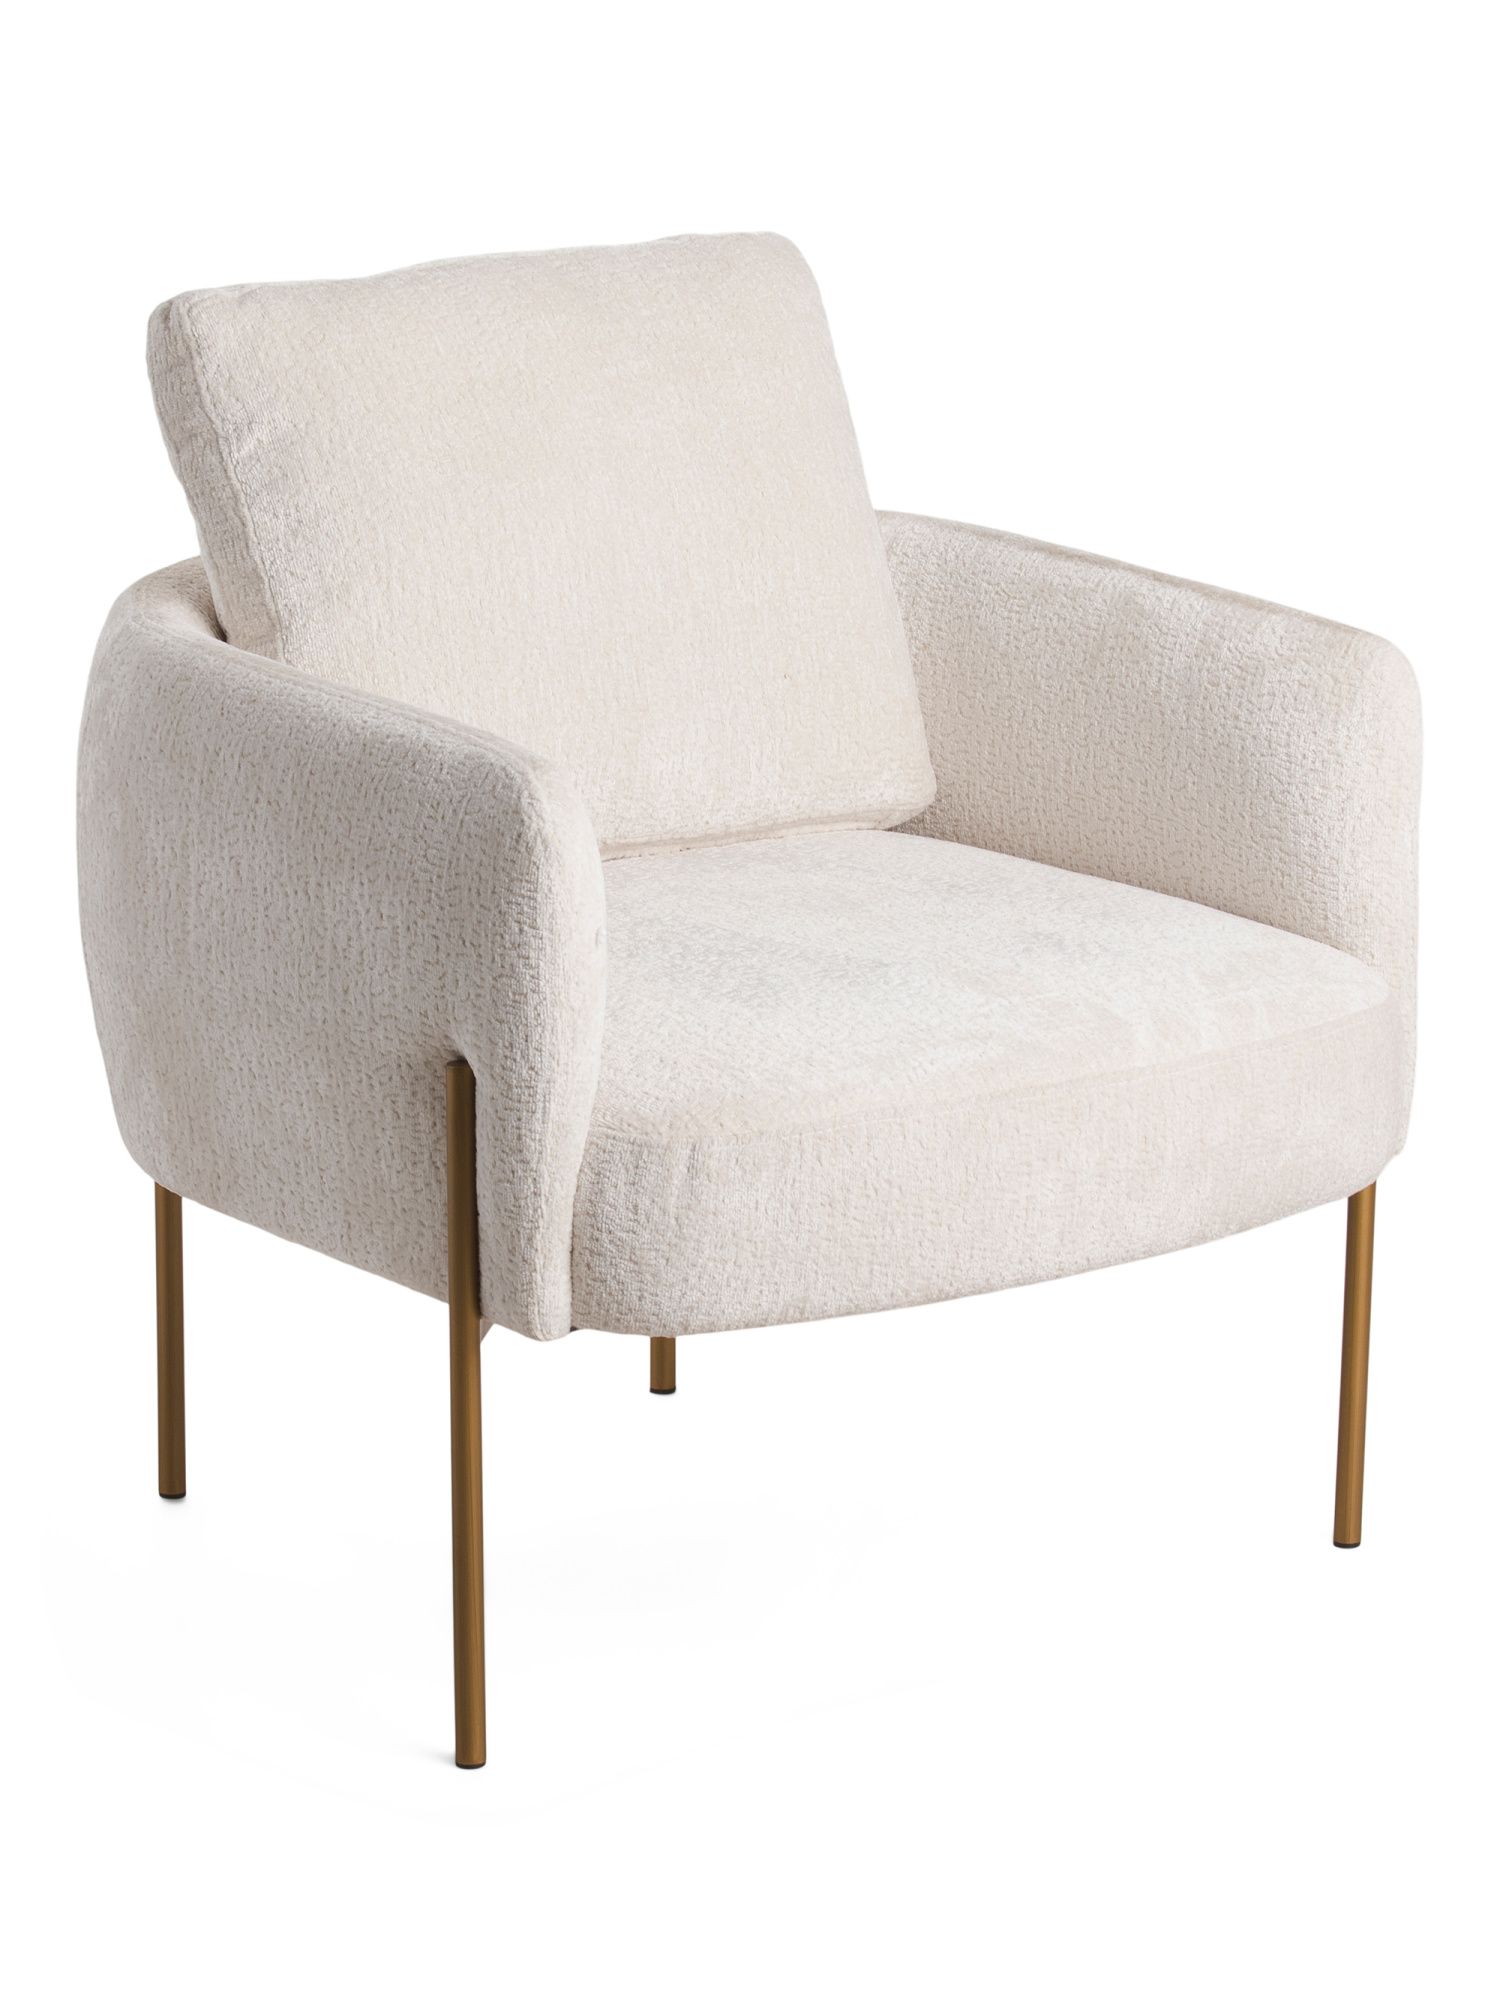 Everly Boucle Accent Chair | TJ Maxx